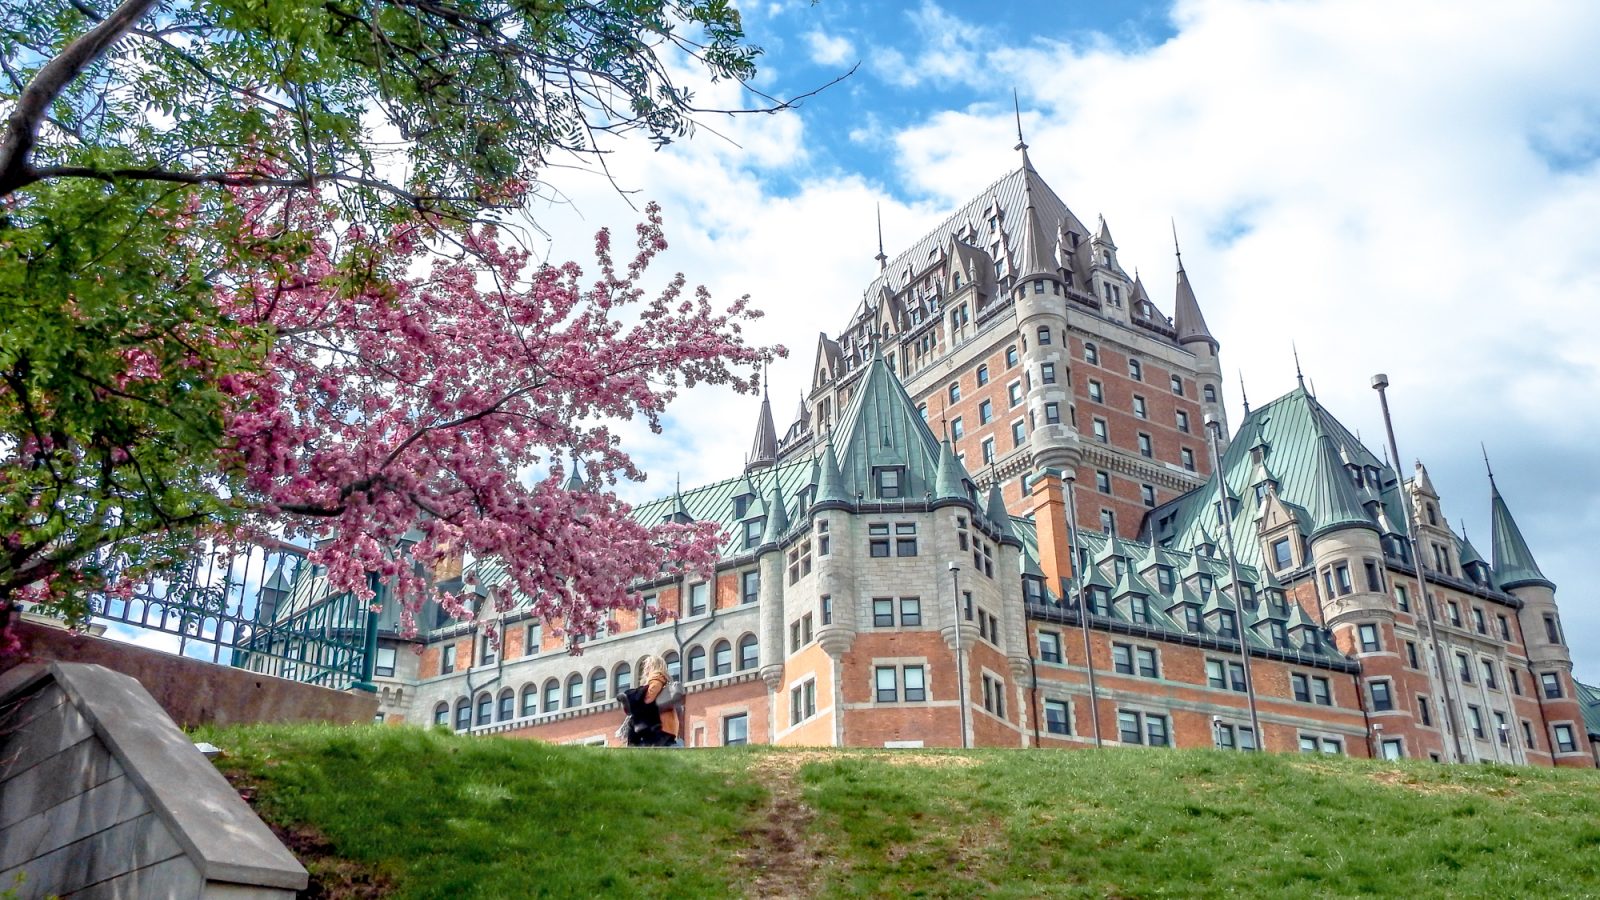 Château Frontenac, Québec City and the weekend of spoils | Canada's castle hotel